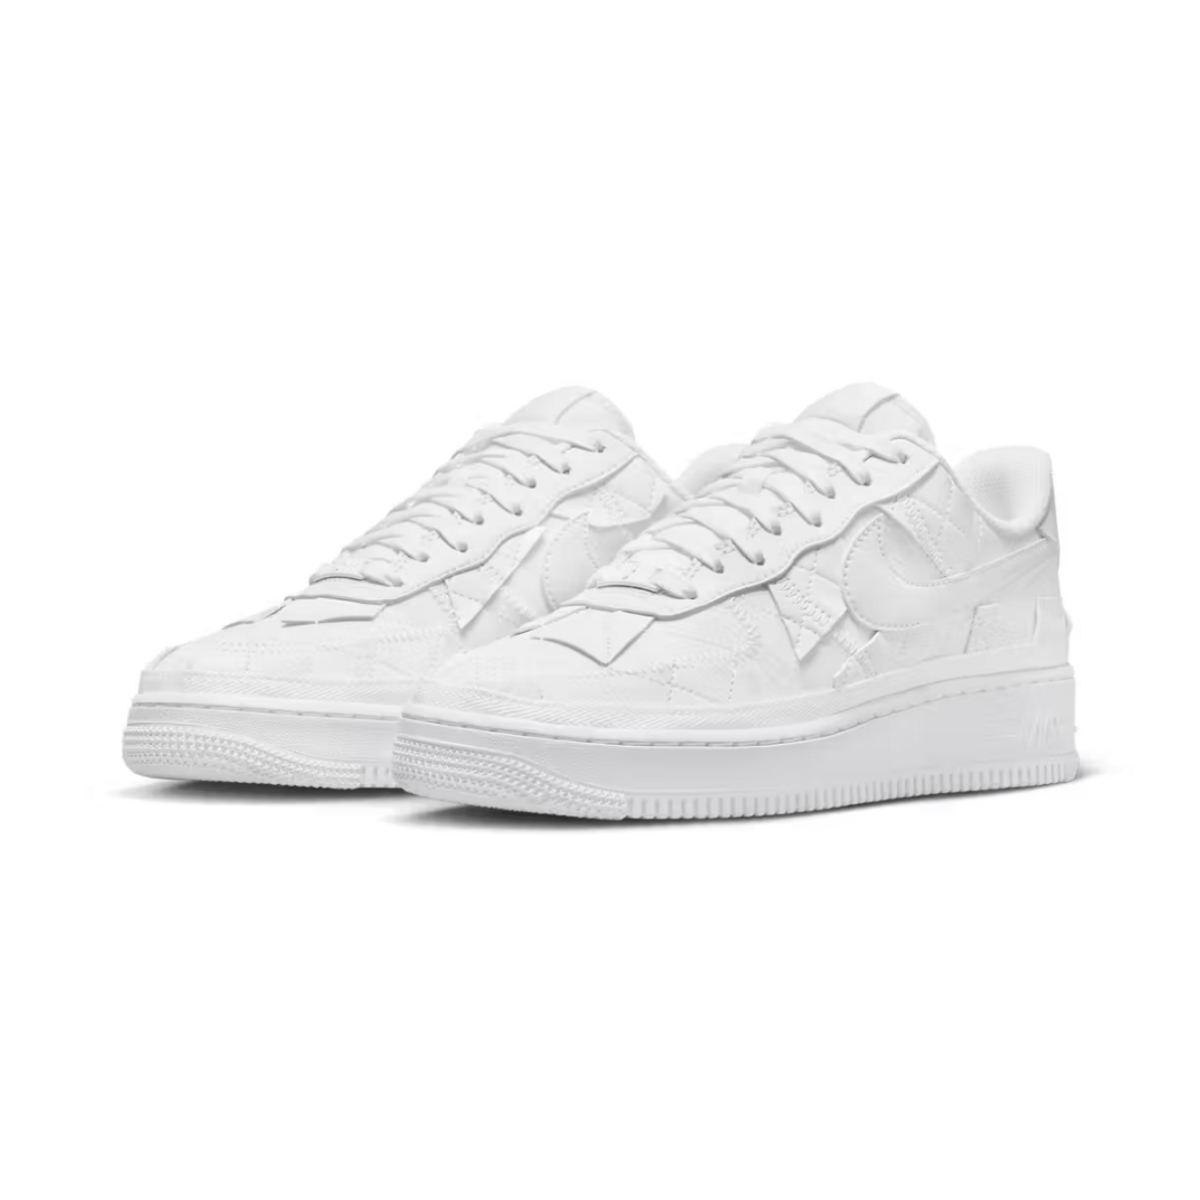 An All New Billie Eilish Nike Air Force 1 Low Has Been Revealed in A Tonal White Colorway